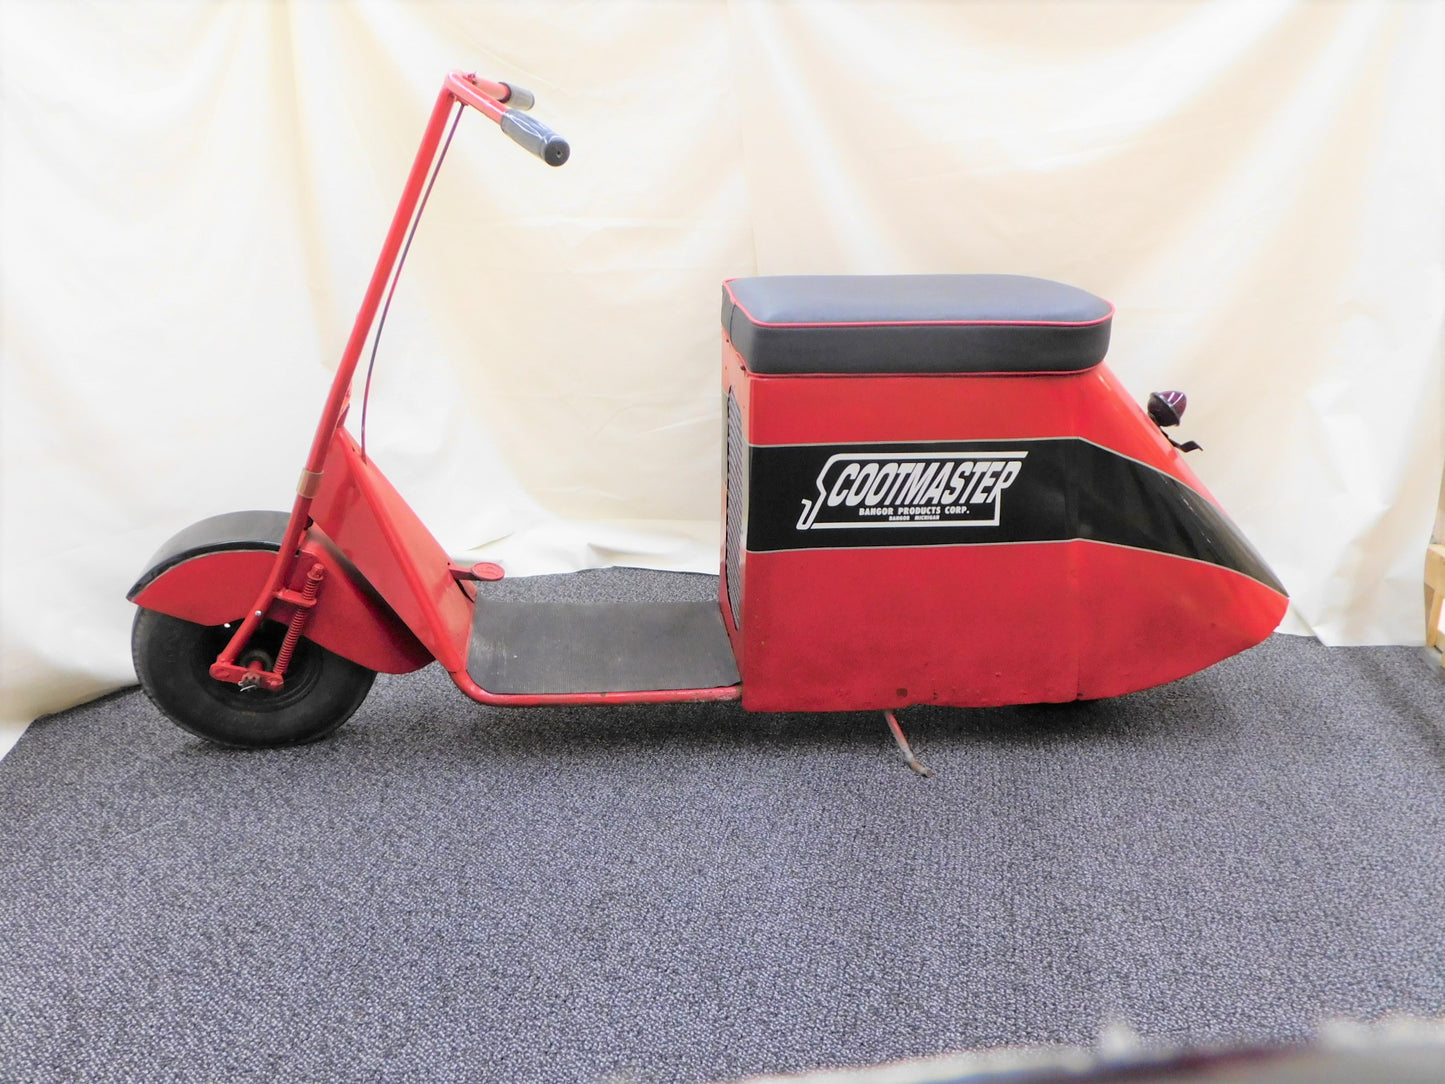 1940s Scootmaster Scooter